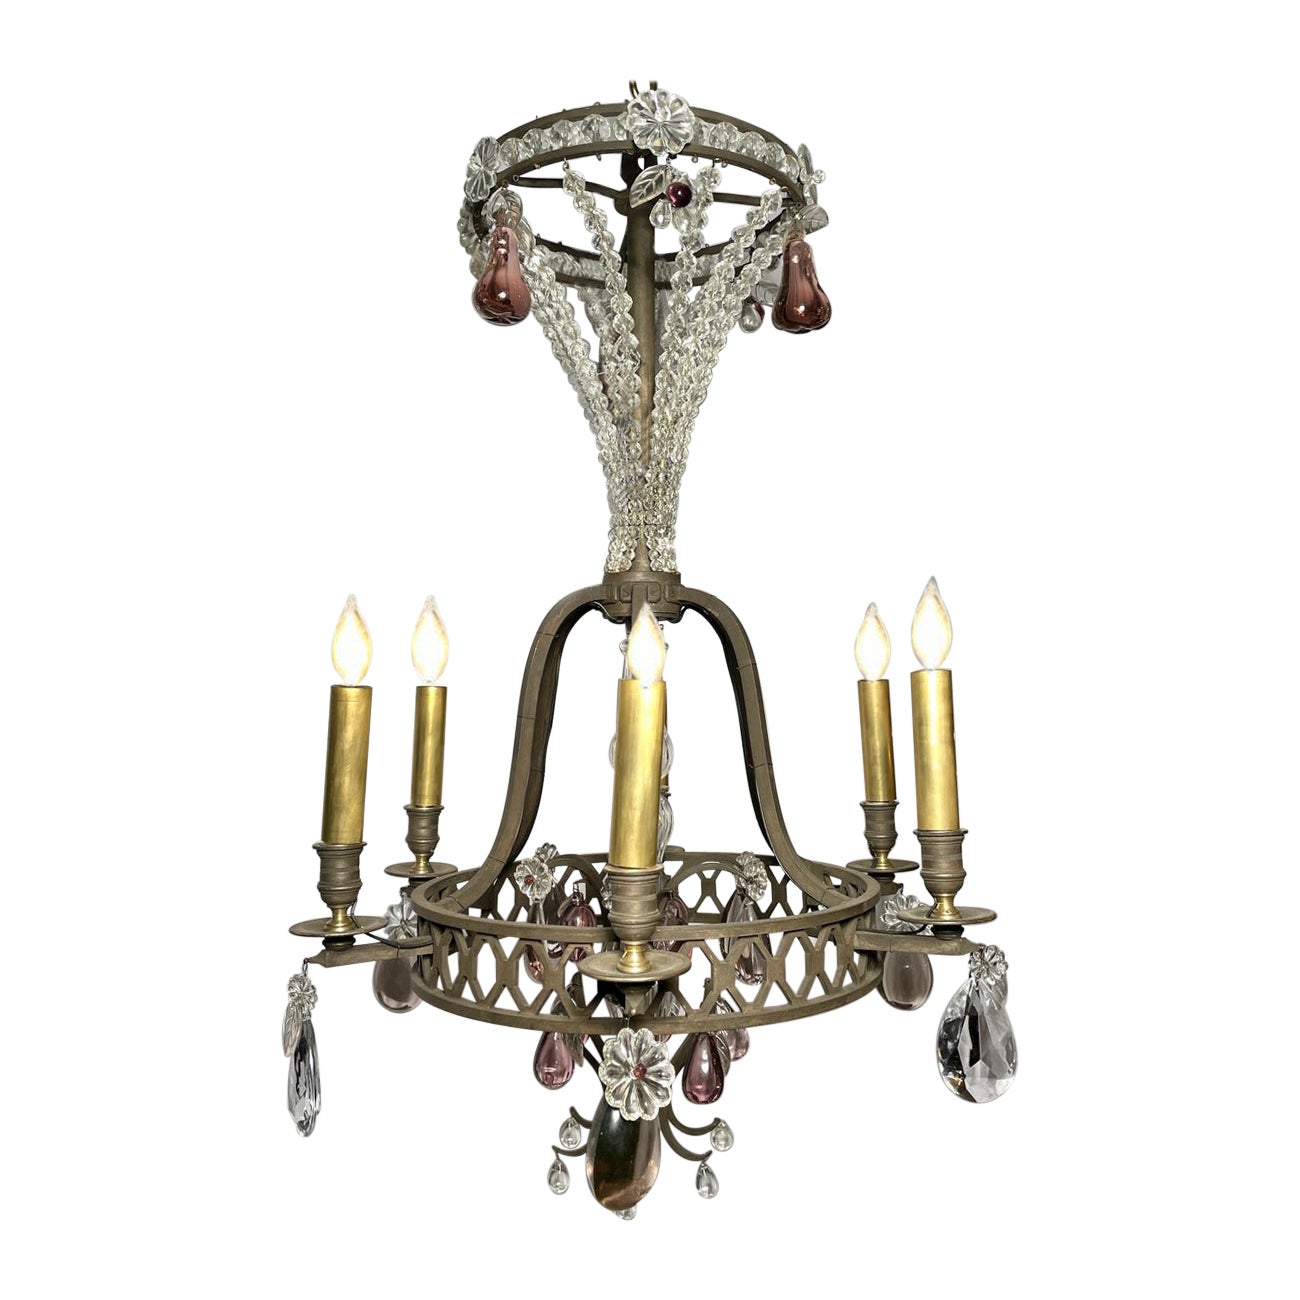 Antique French Wrought Iron & Crystal Chandelier, Circa 1880.